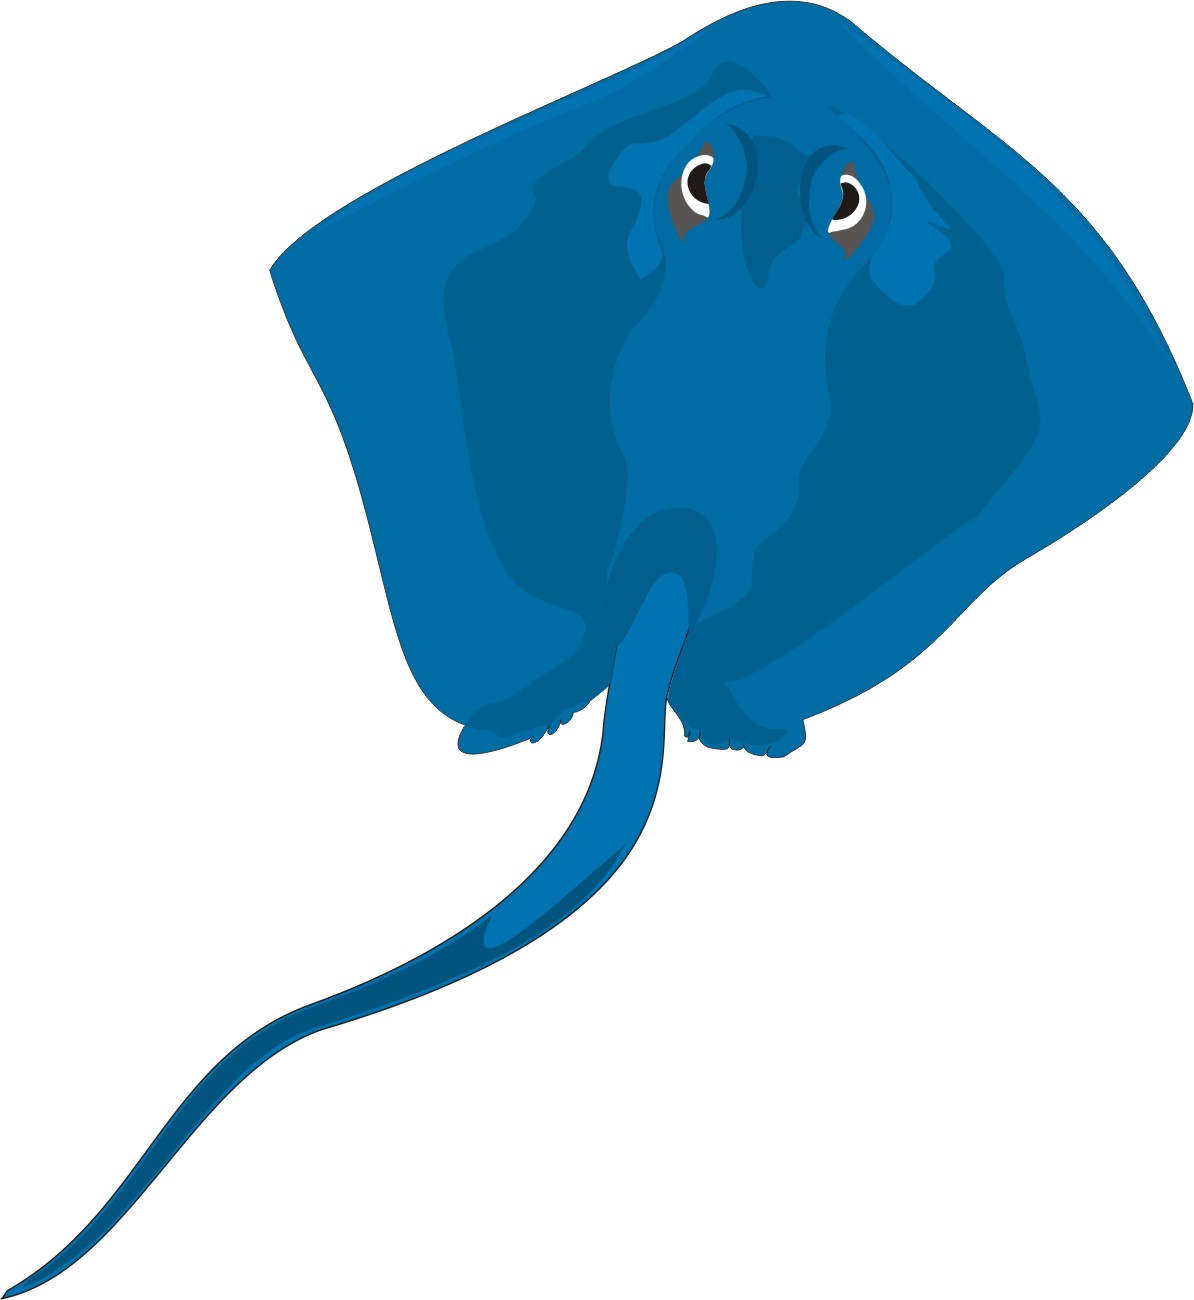 Sting Ray   Free Cliparts That You Can Download To You Computer And